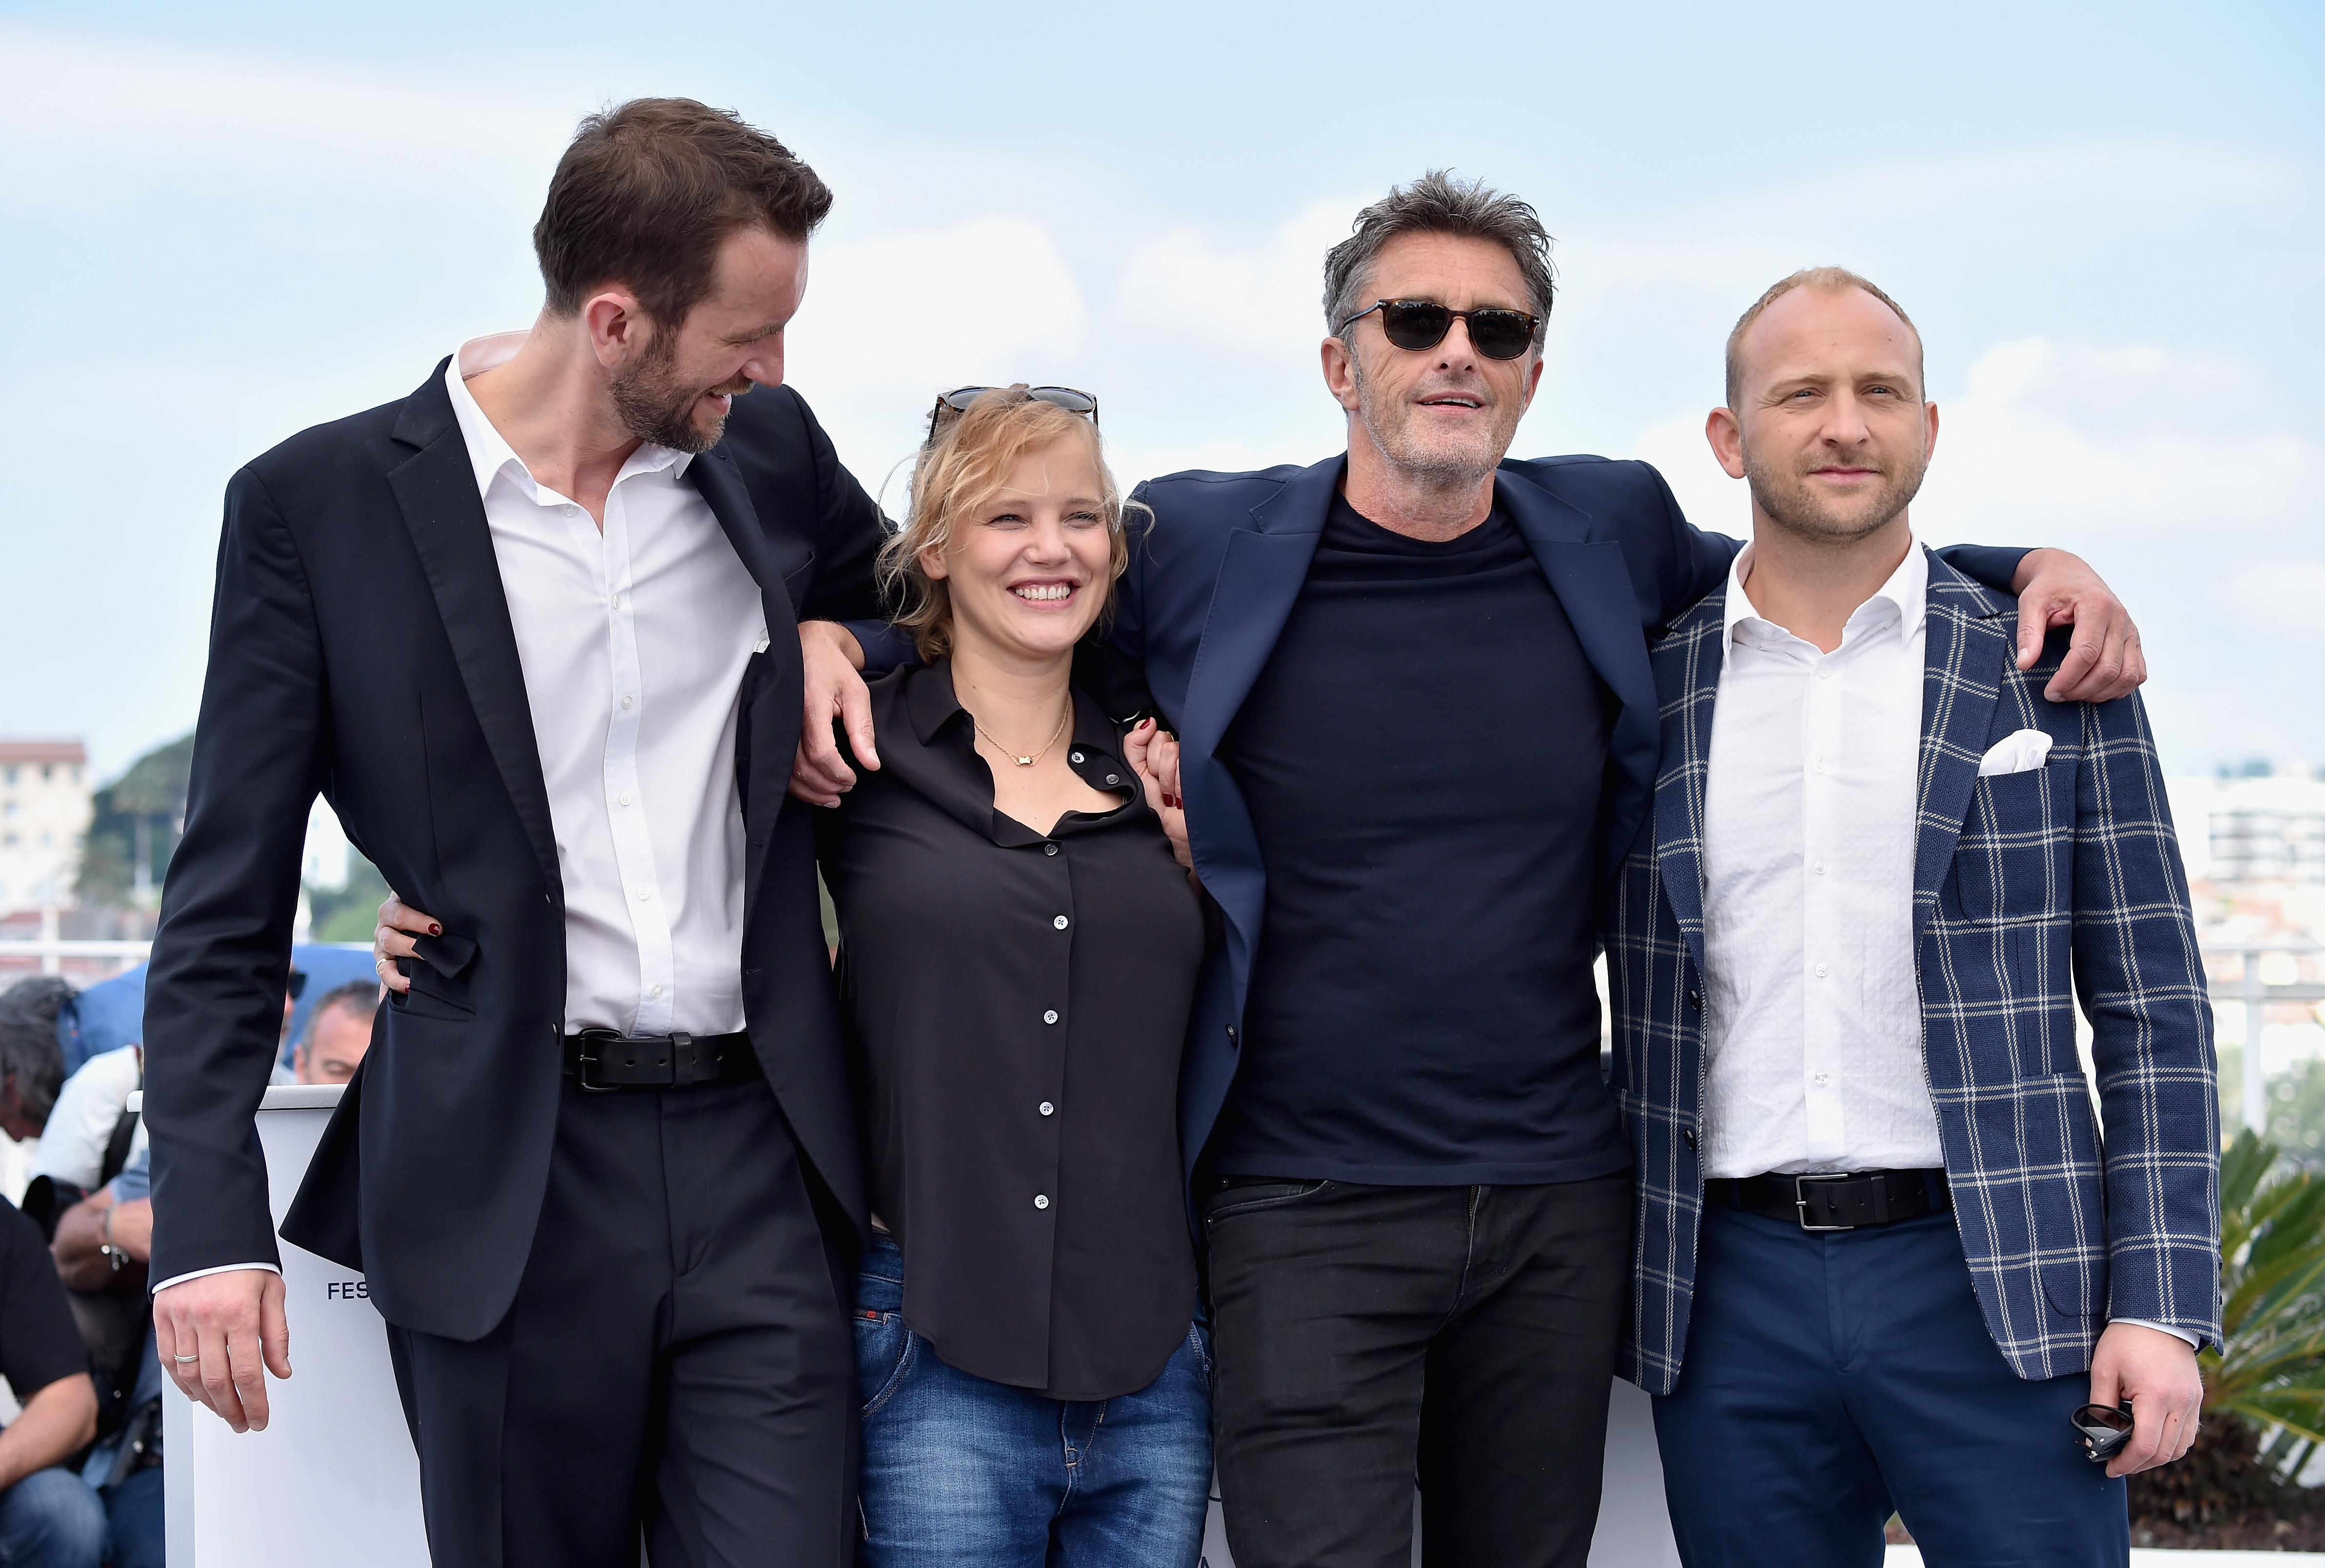 Actor Tomasz Kot, actress Joanna Kulig, director Pawel Pawlikowsk and actor Borys Szyc at the 71st annual Cannes Film Festival on May 11, 2018 in Cannes, France. (Dominique Charriau—WireImage/Getty Images)